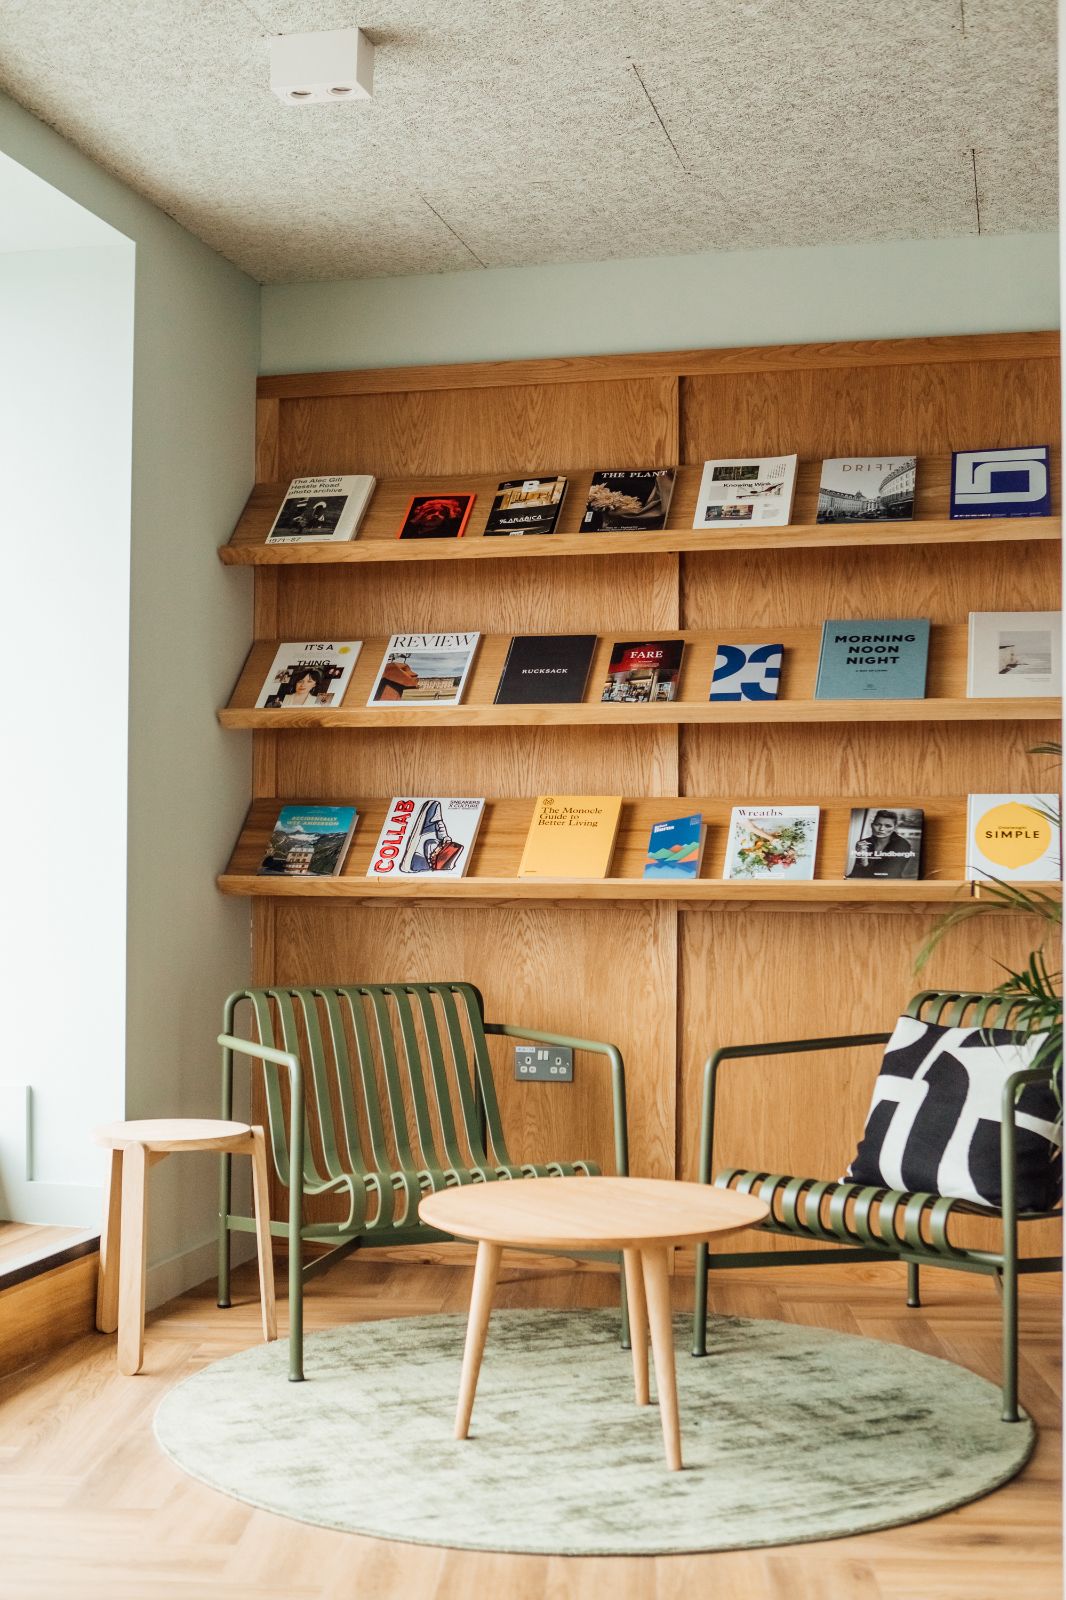 Interior design by 93. Green chairs, sage green circular rug, wooden cladding on the walls with thin bookshelves.